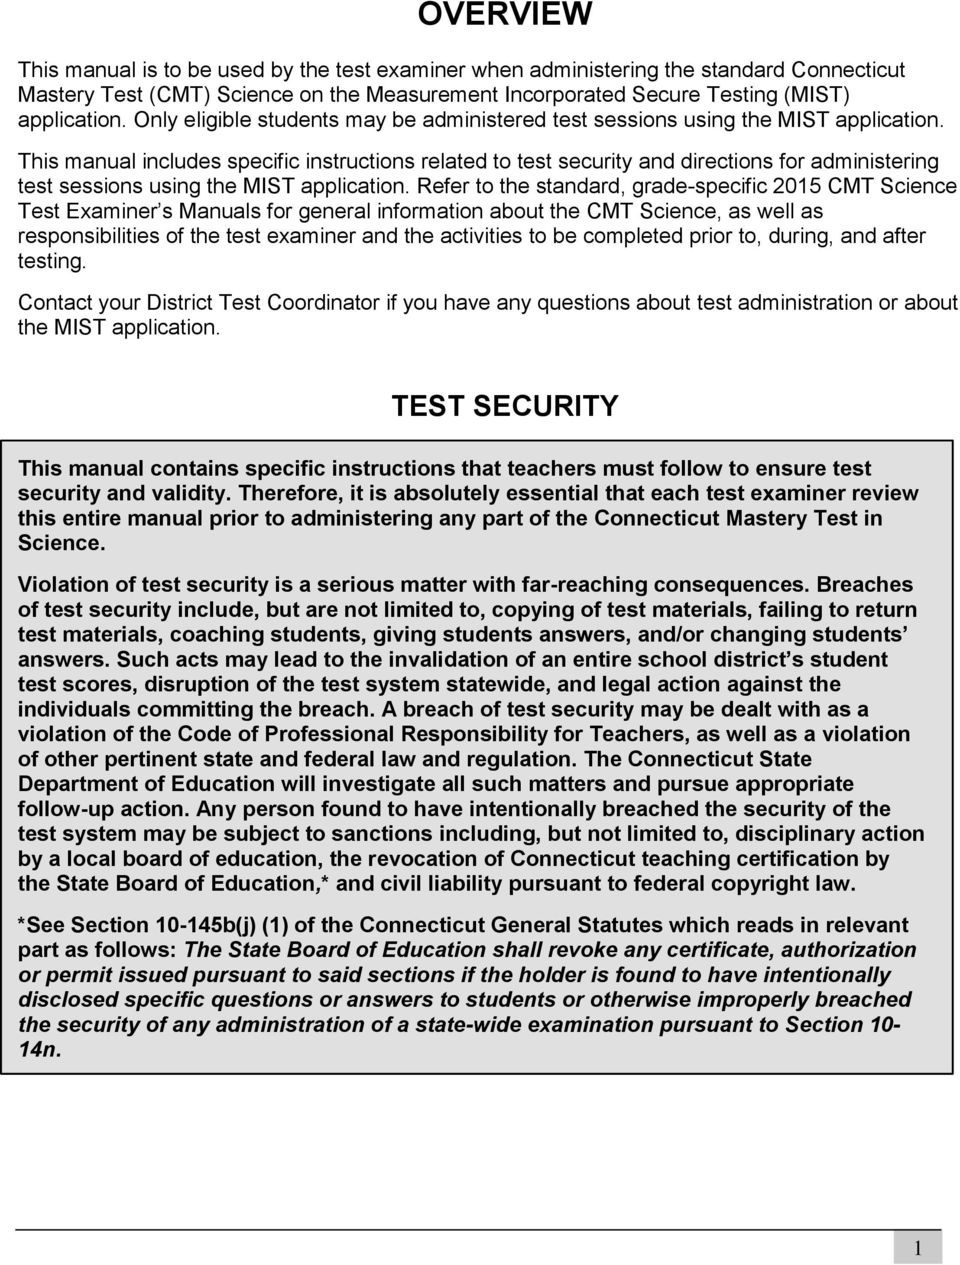 This manual includes specific instructions related to test security and directions for administering test sessions using the MIST application.